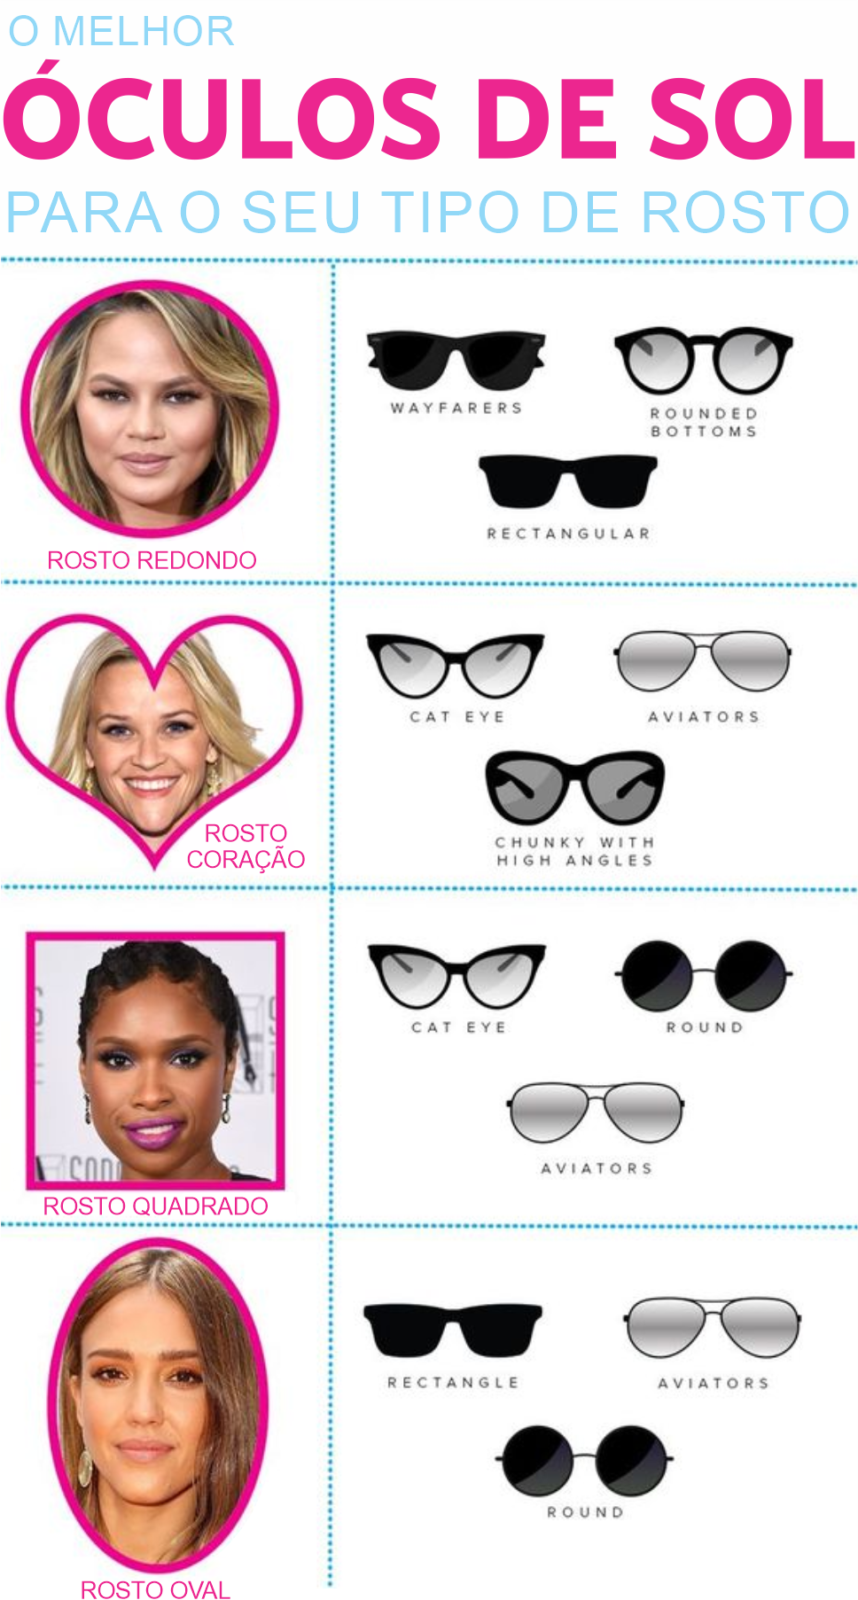 What is the best sunglasses for your face type